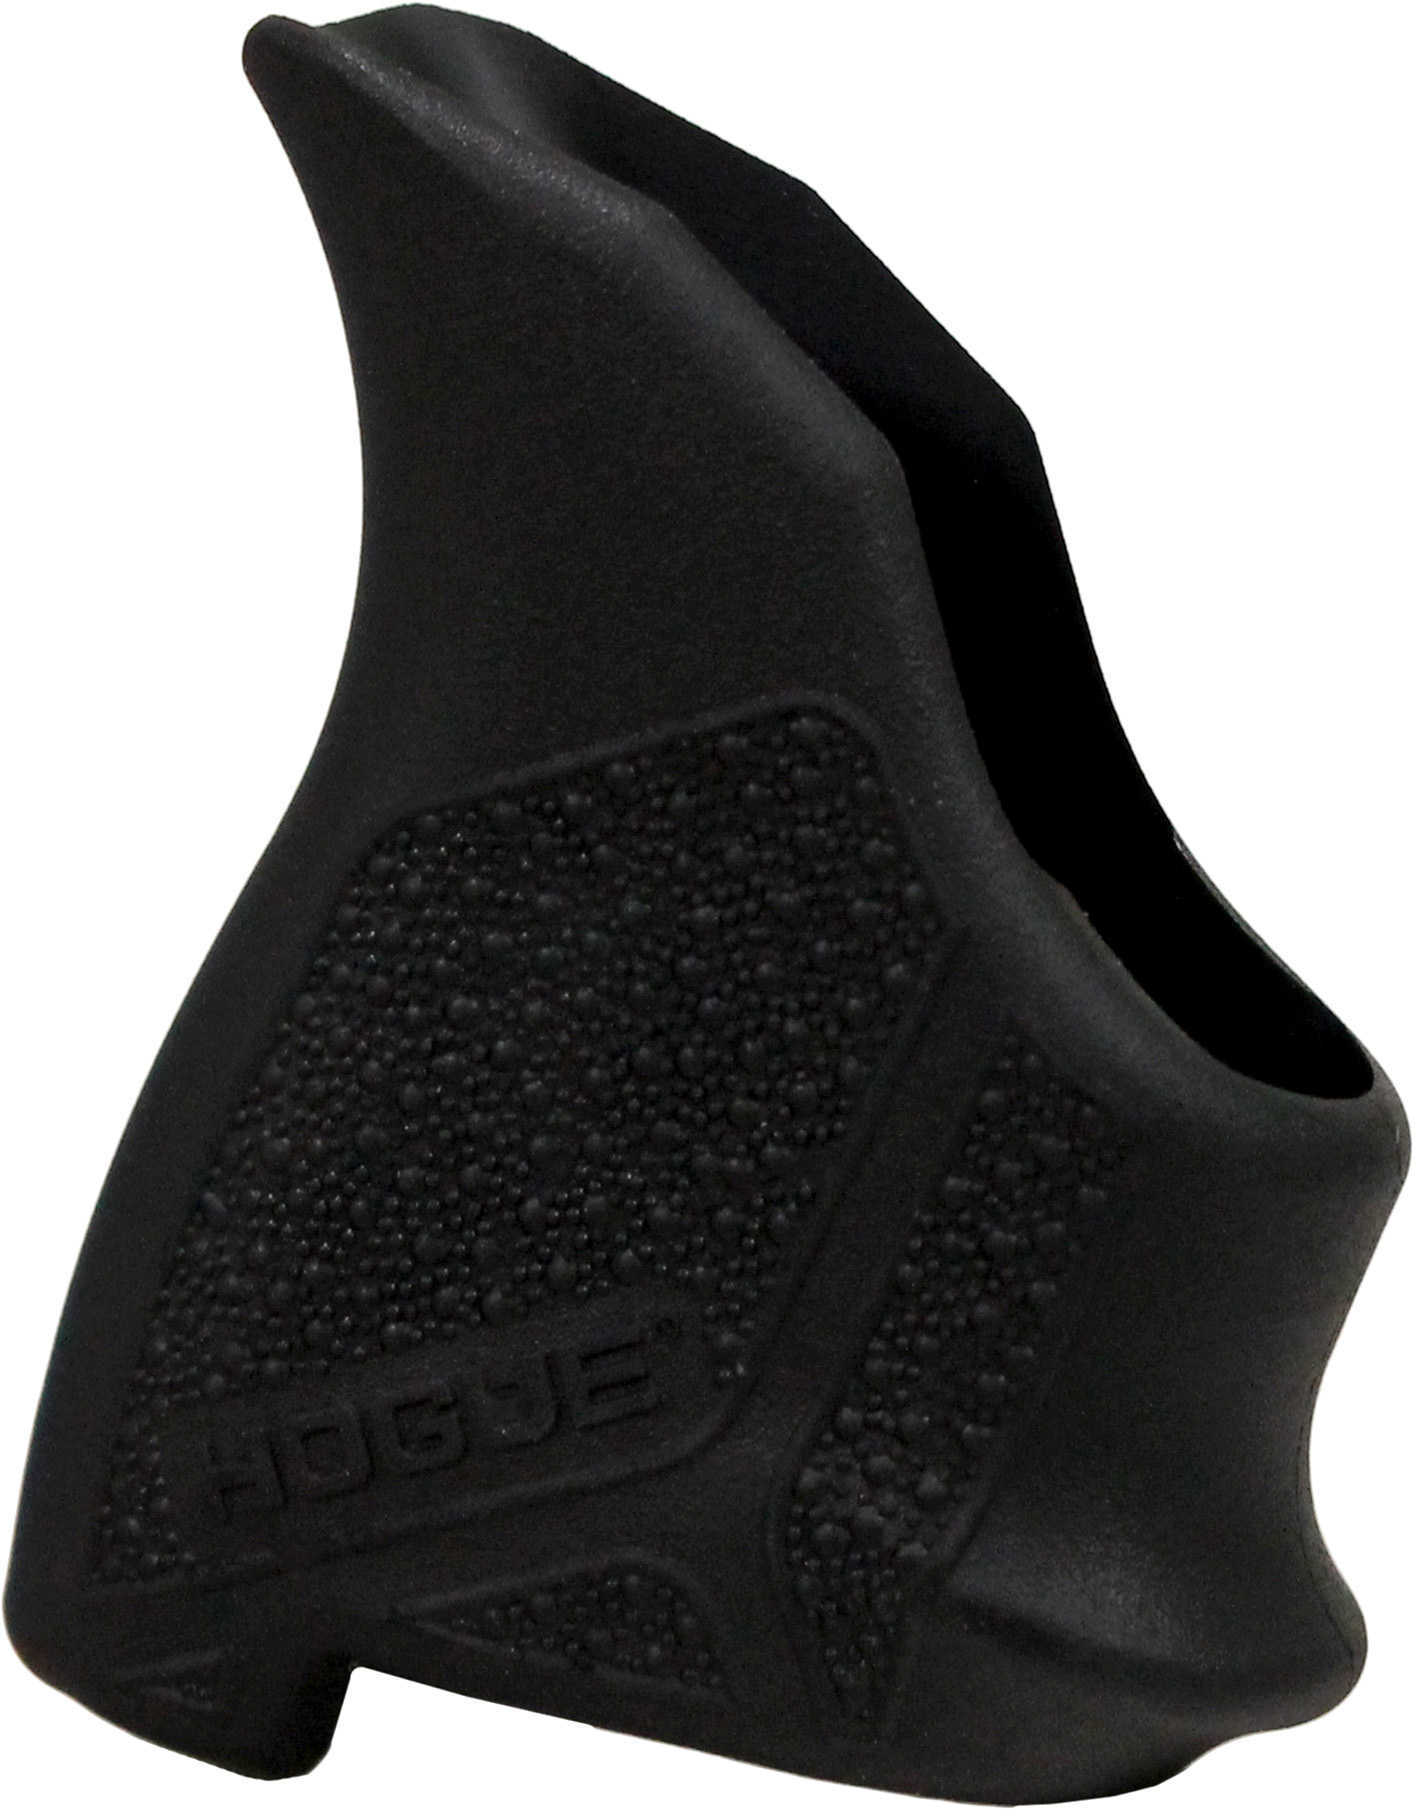 Hogue Handall Beaver Tail Grip Sleeve Ruger LCP II Black